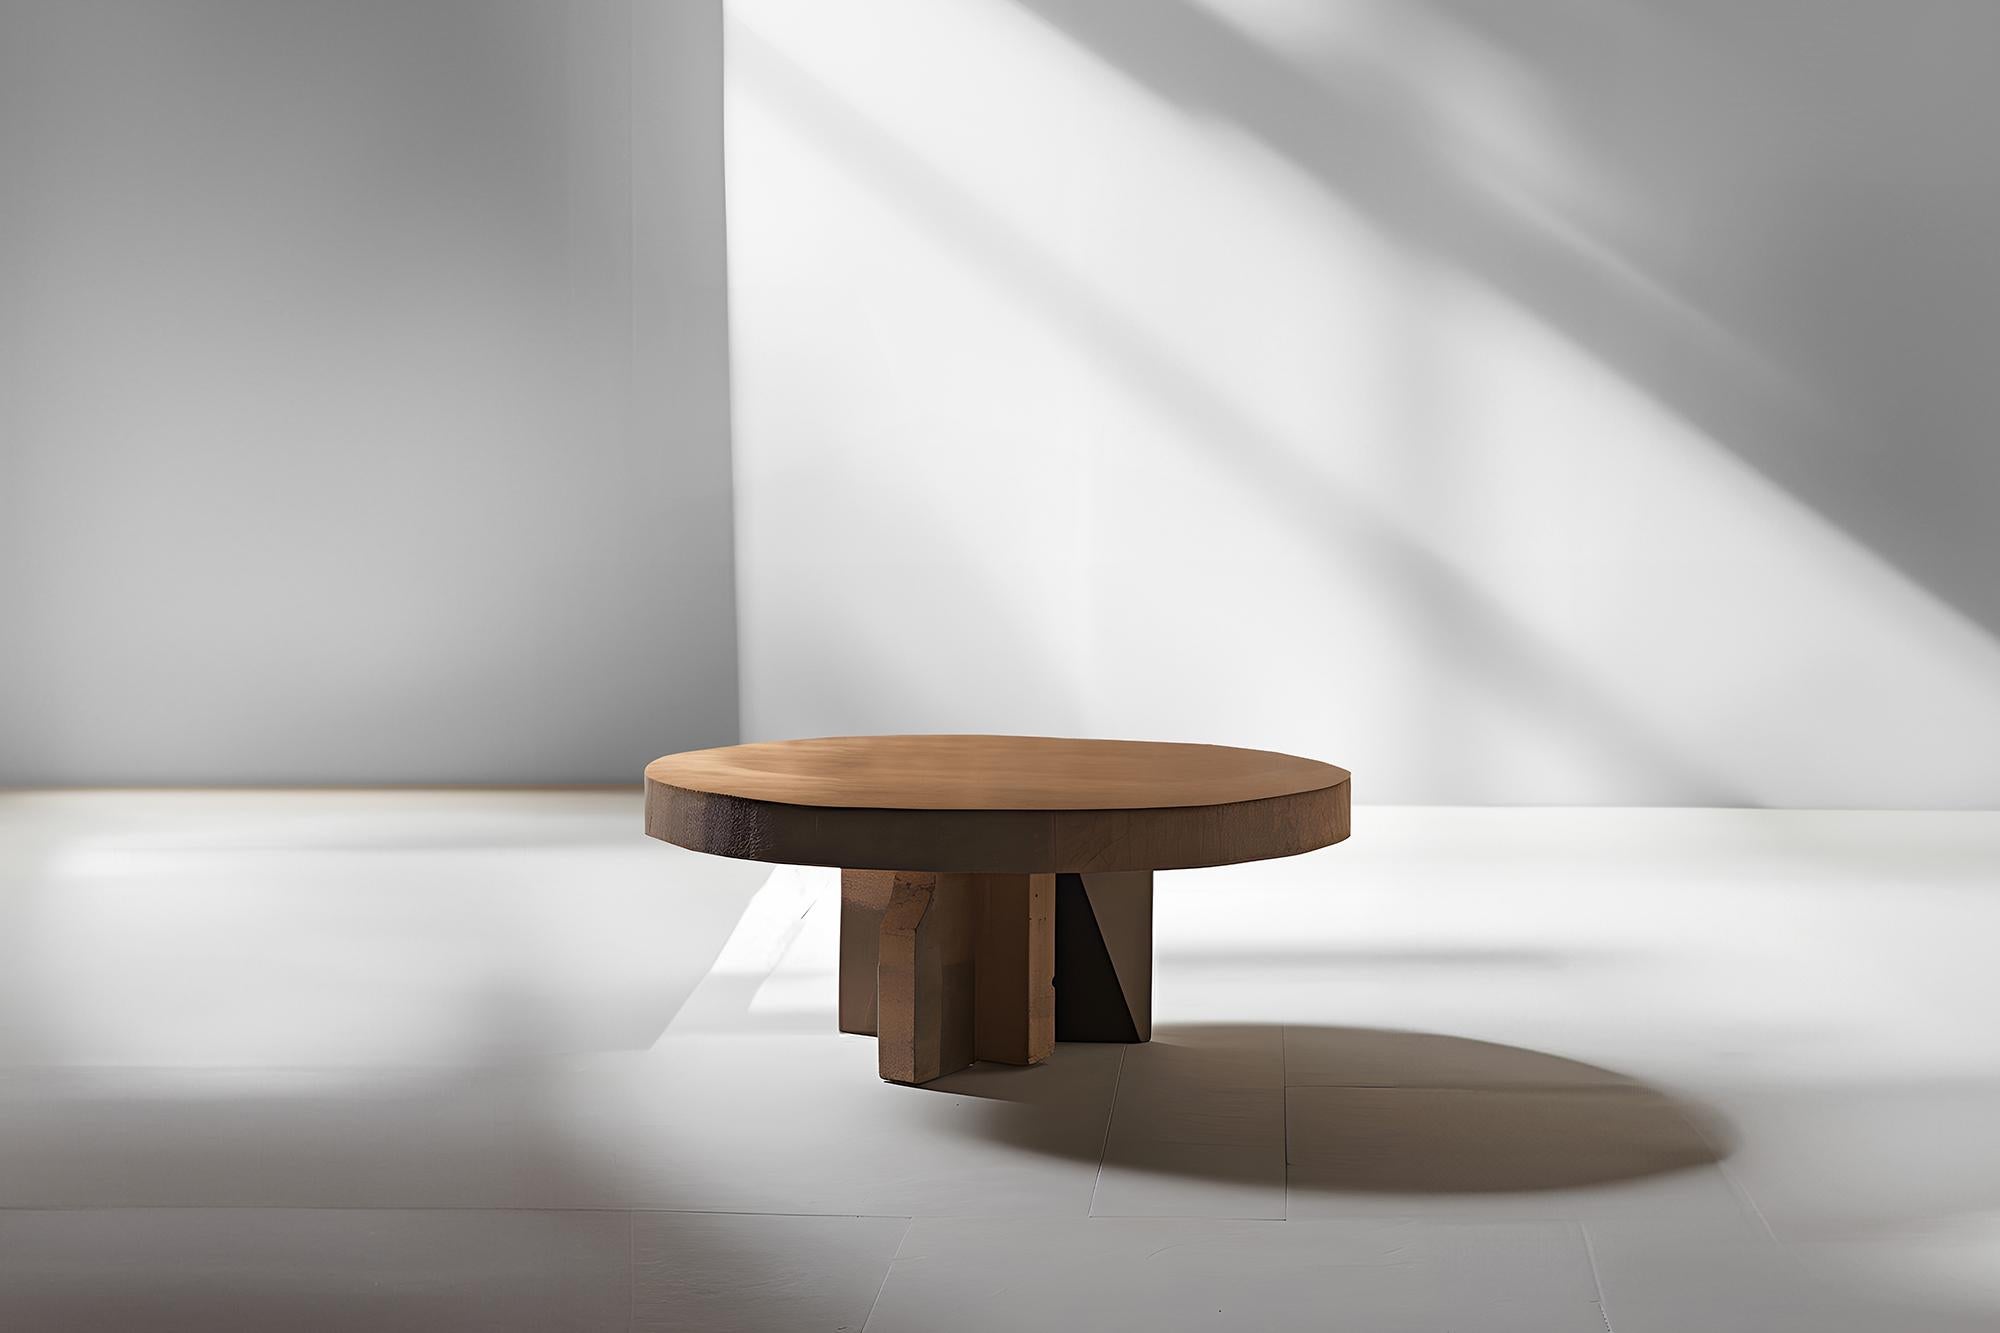 Dark Red Tinted Round Coffee Table - Eclipse Fundamenta 39 by NONO


Sculptural coffee table made of solid wood with a natural water-based or black tinted finish. Due to the nature of the production process, each piece may vary in grain, texture,